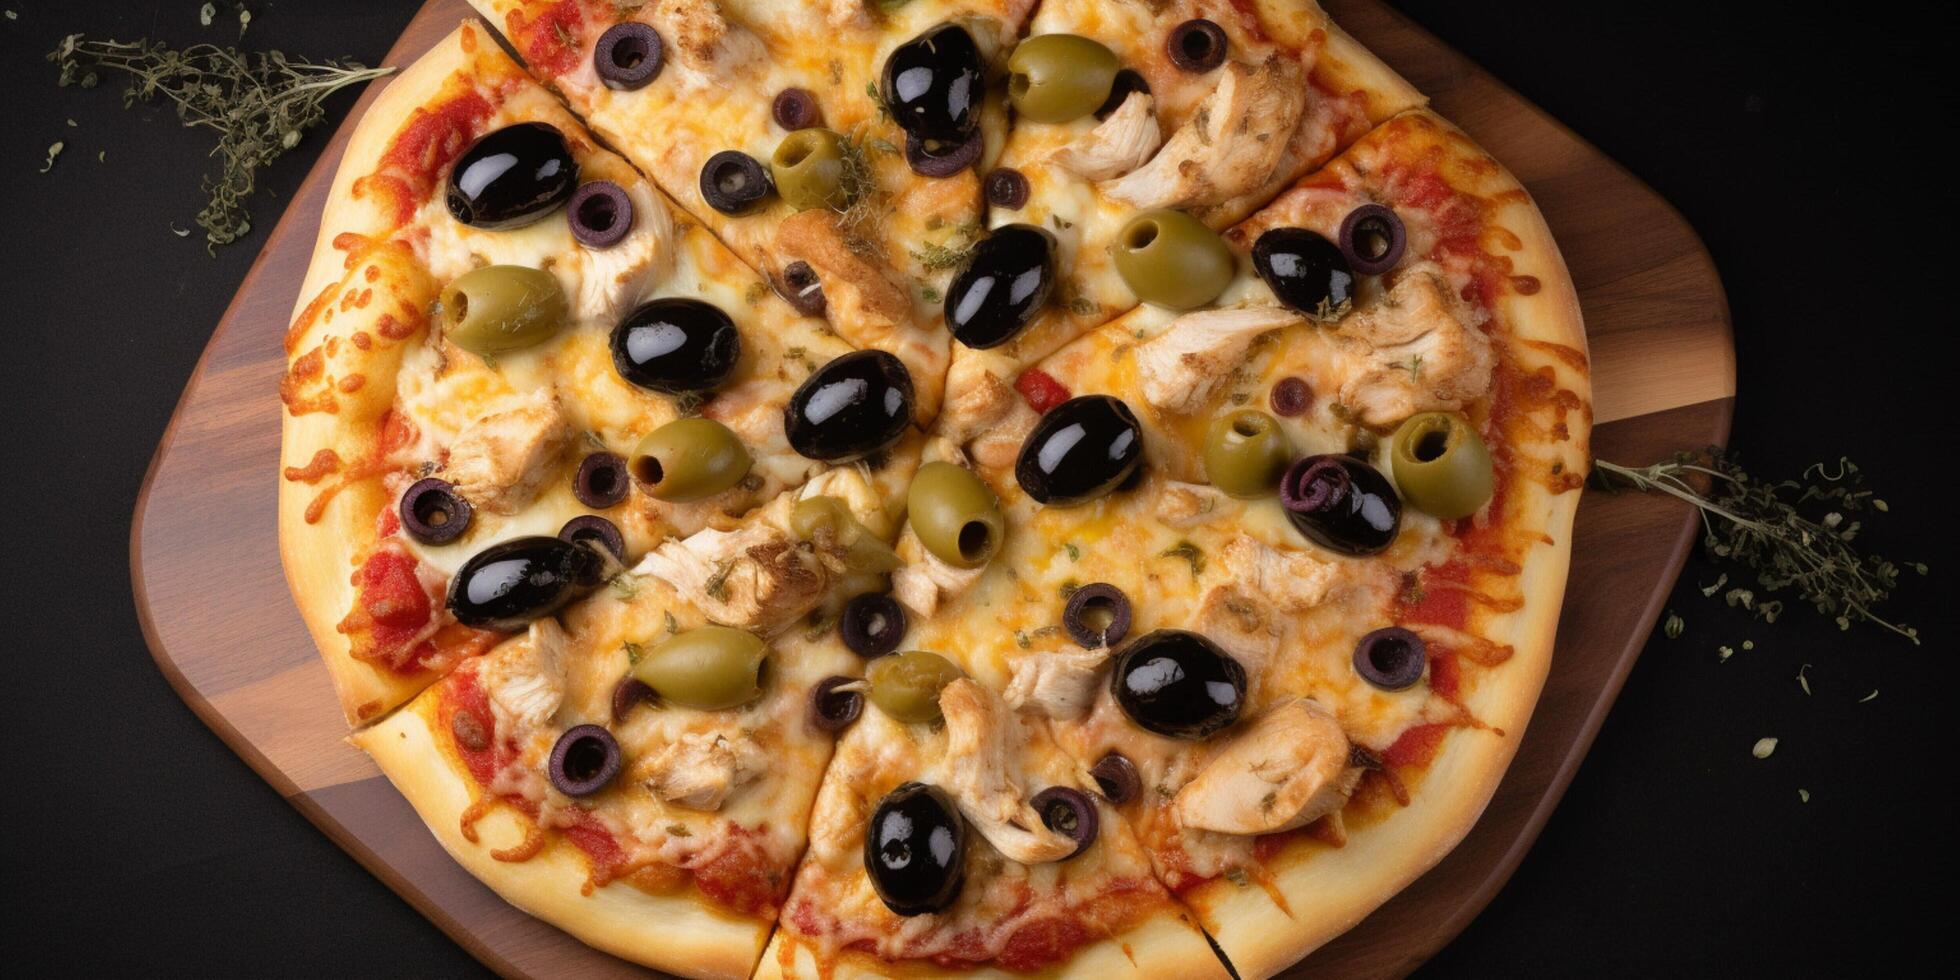 A pizza with tomatoes and olives photo